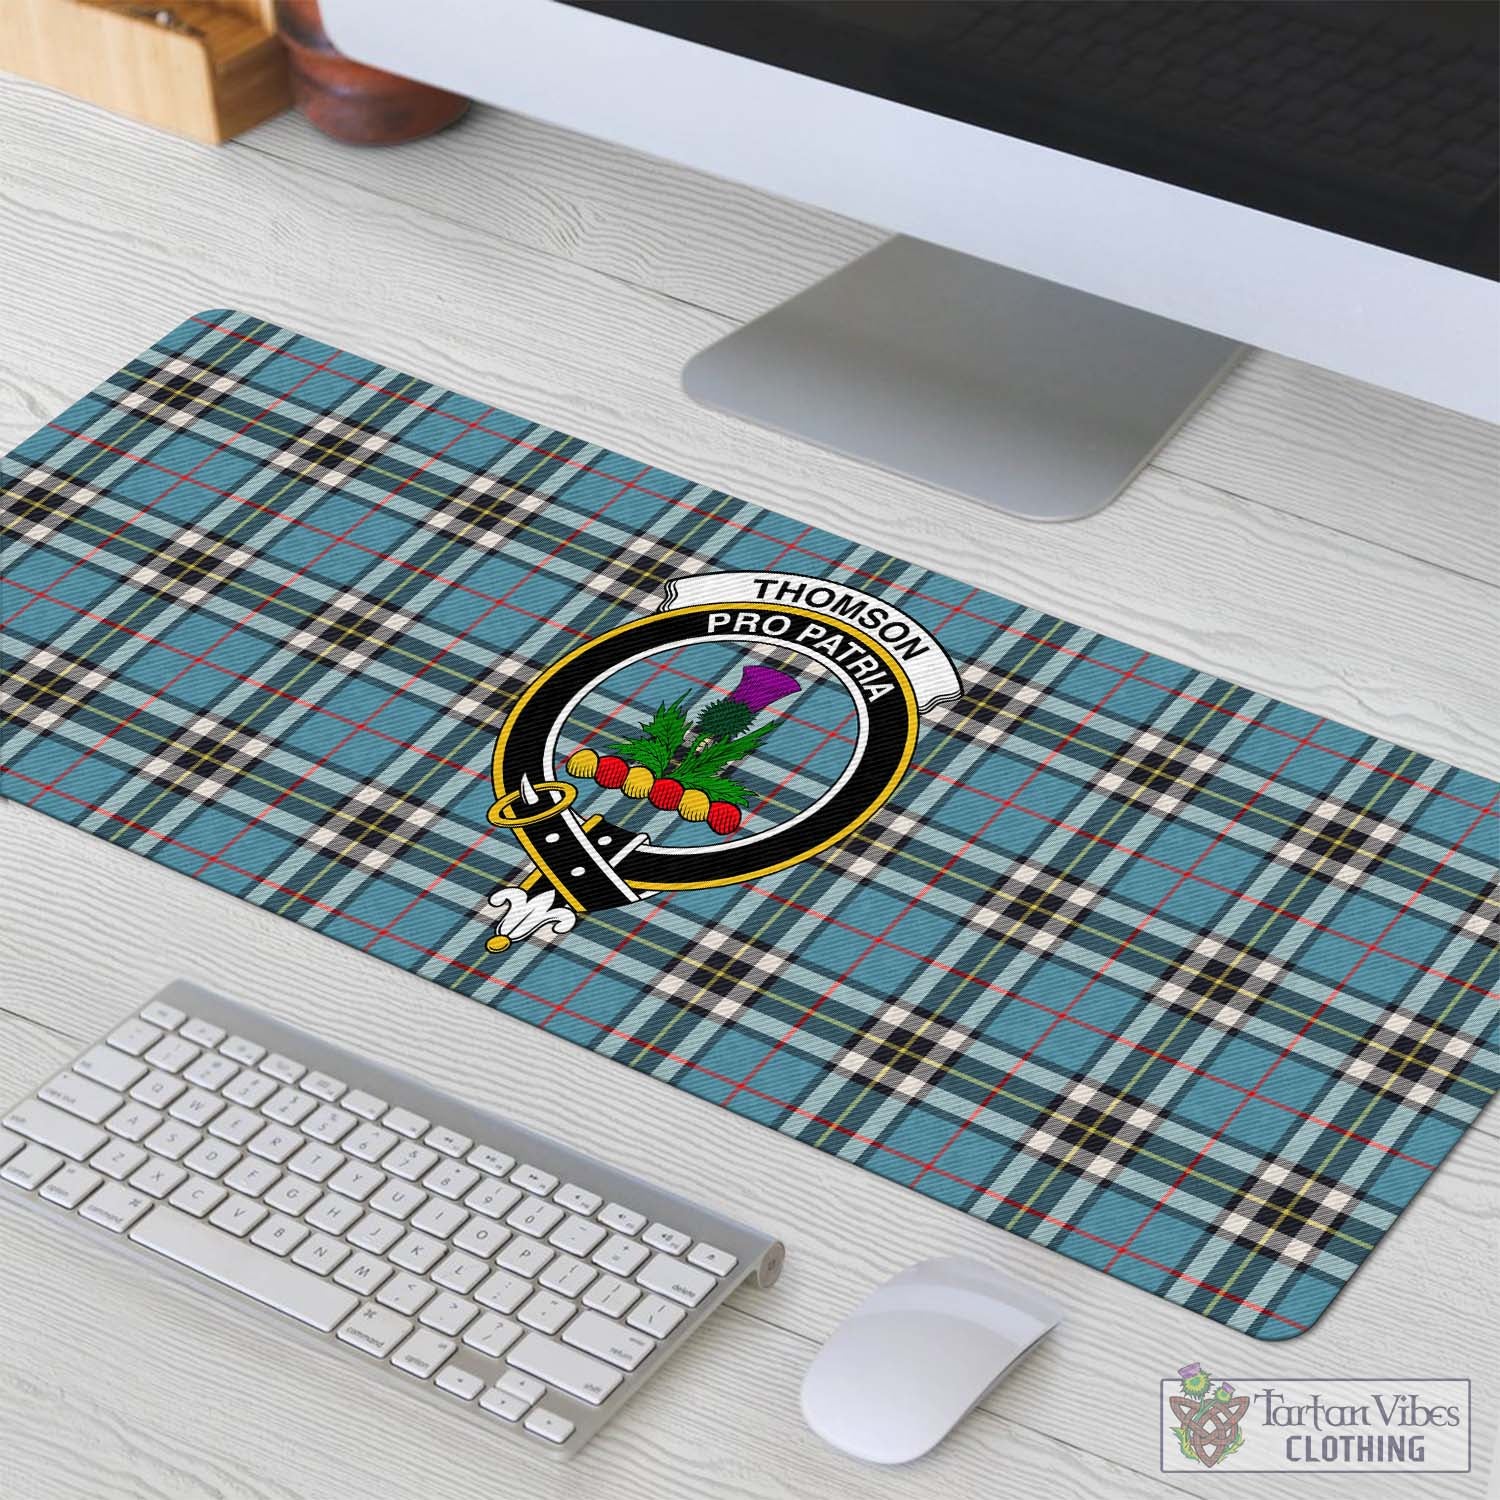 Tartan Vibes Clothing Thomson Tartan Mouse Pad with Family Crest